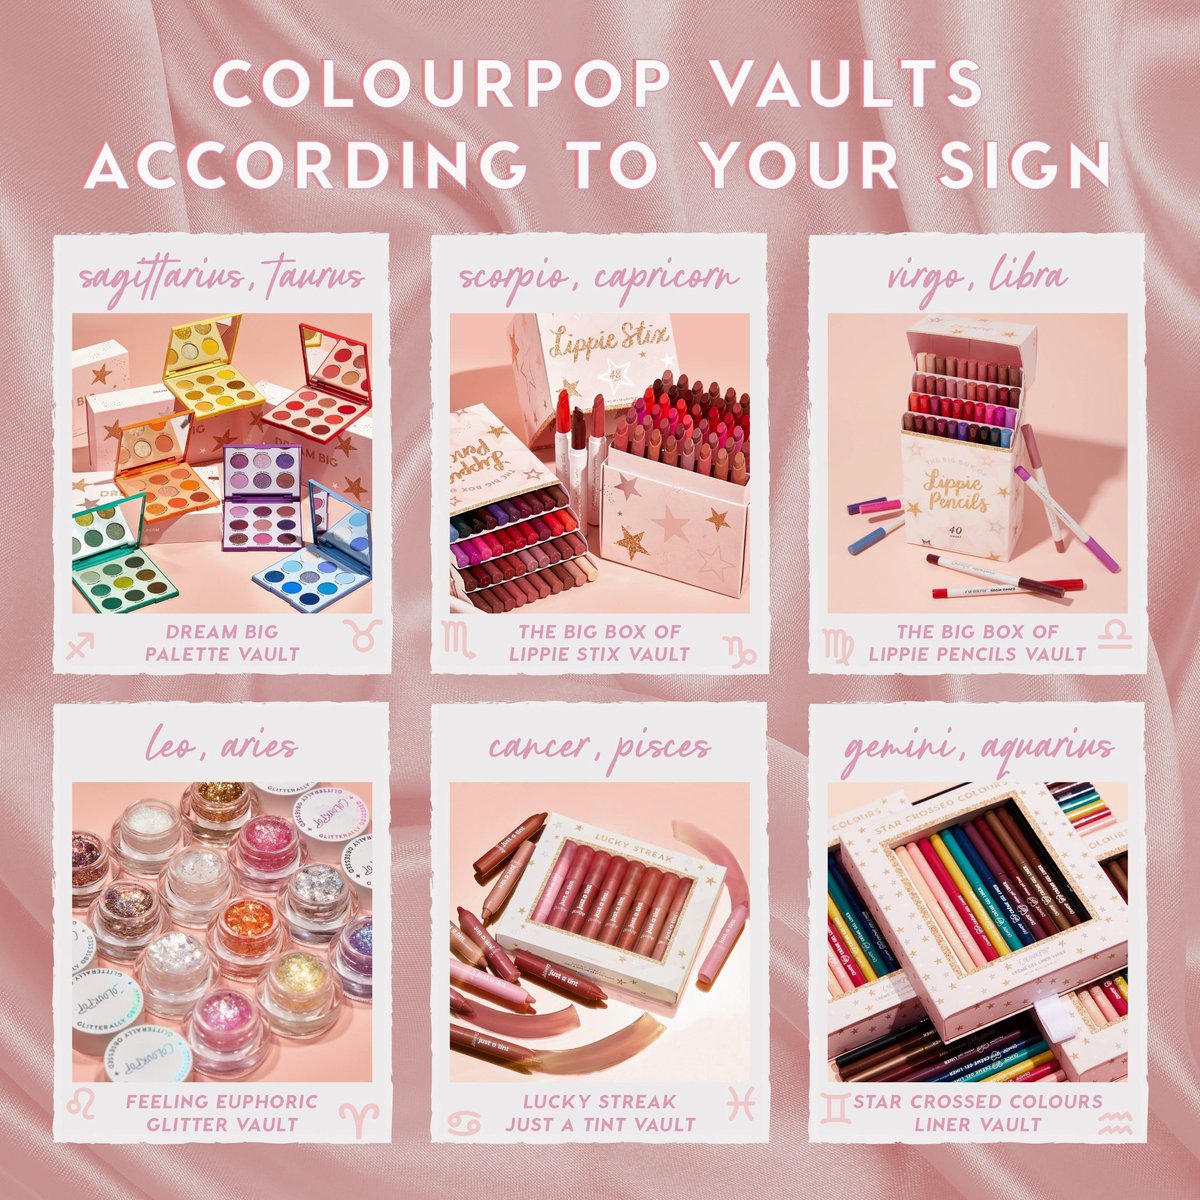 #GIVEAWAY

All of our VAULTS are BACK! & we're giving away ALL SIX VAULTS to one lucky winner! To enter, all you have to do is:

✨Like & RT
✨Follow @ColourPopCo 
✨reply w/your zodiac sign